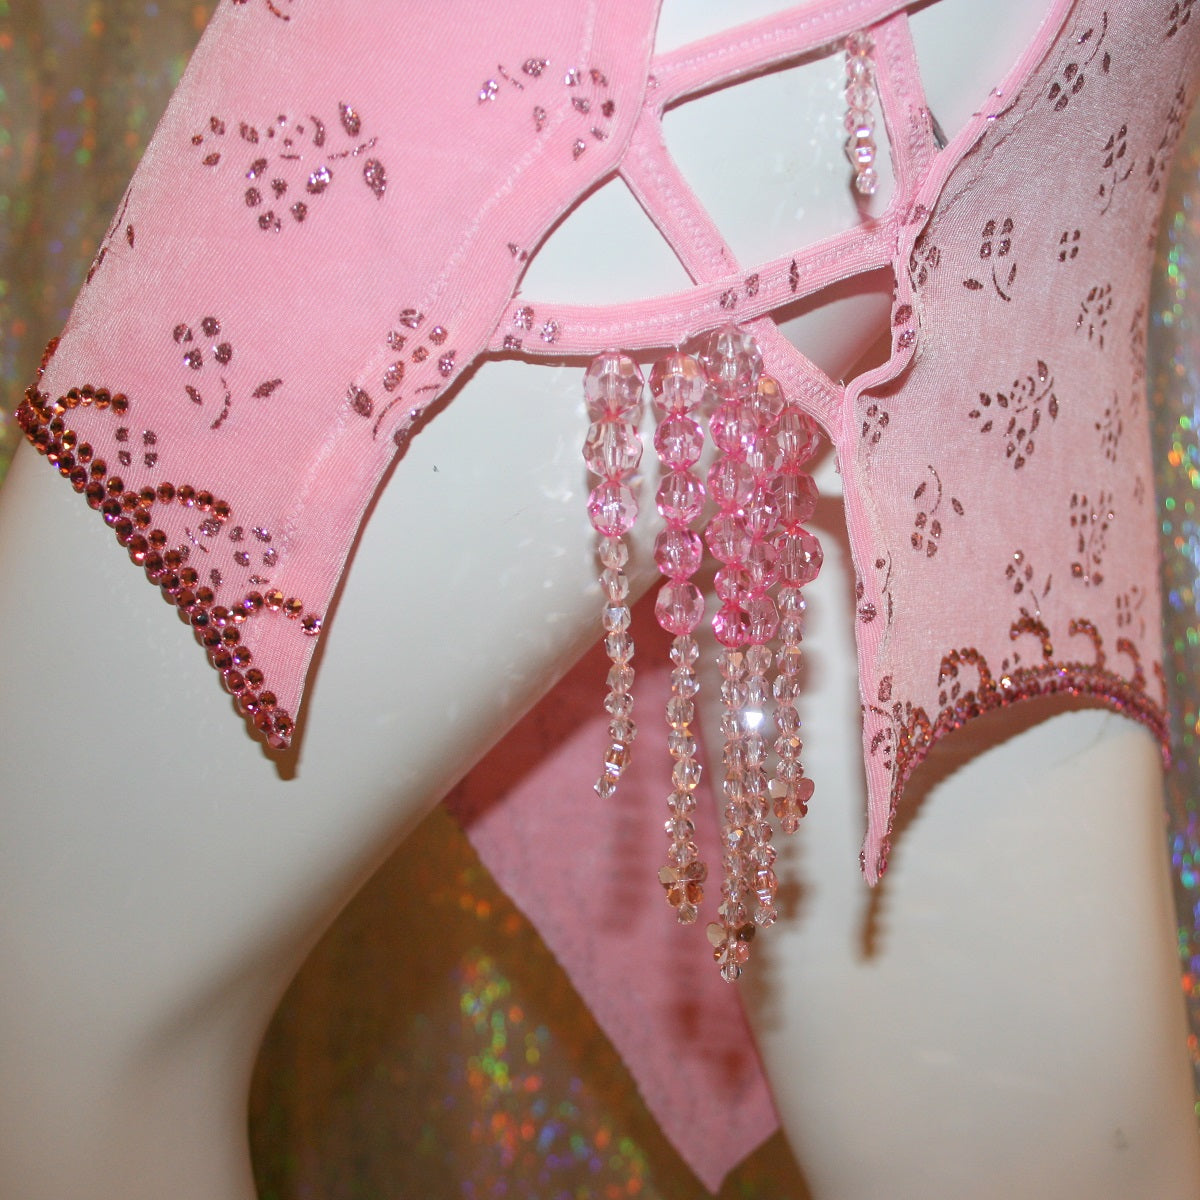 close view of details on Delicate pink Latin-rhythm dress created of light pink glitter slinky with a delicate glitter flower pattern has sleek & classic lines, long sleeve on the right side with open lattice work detailing on the left side, embellished with Swarovski rhinestone work & hand beading